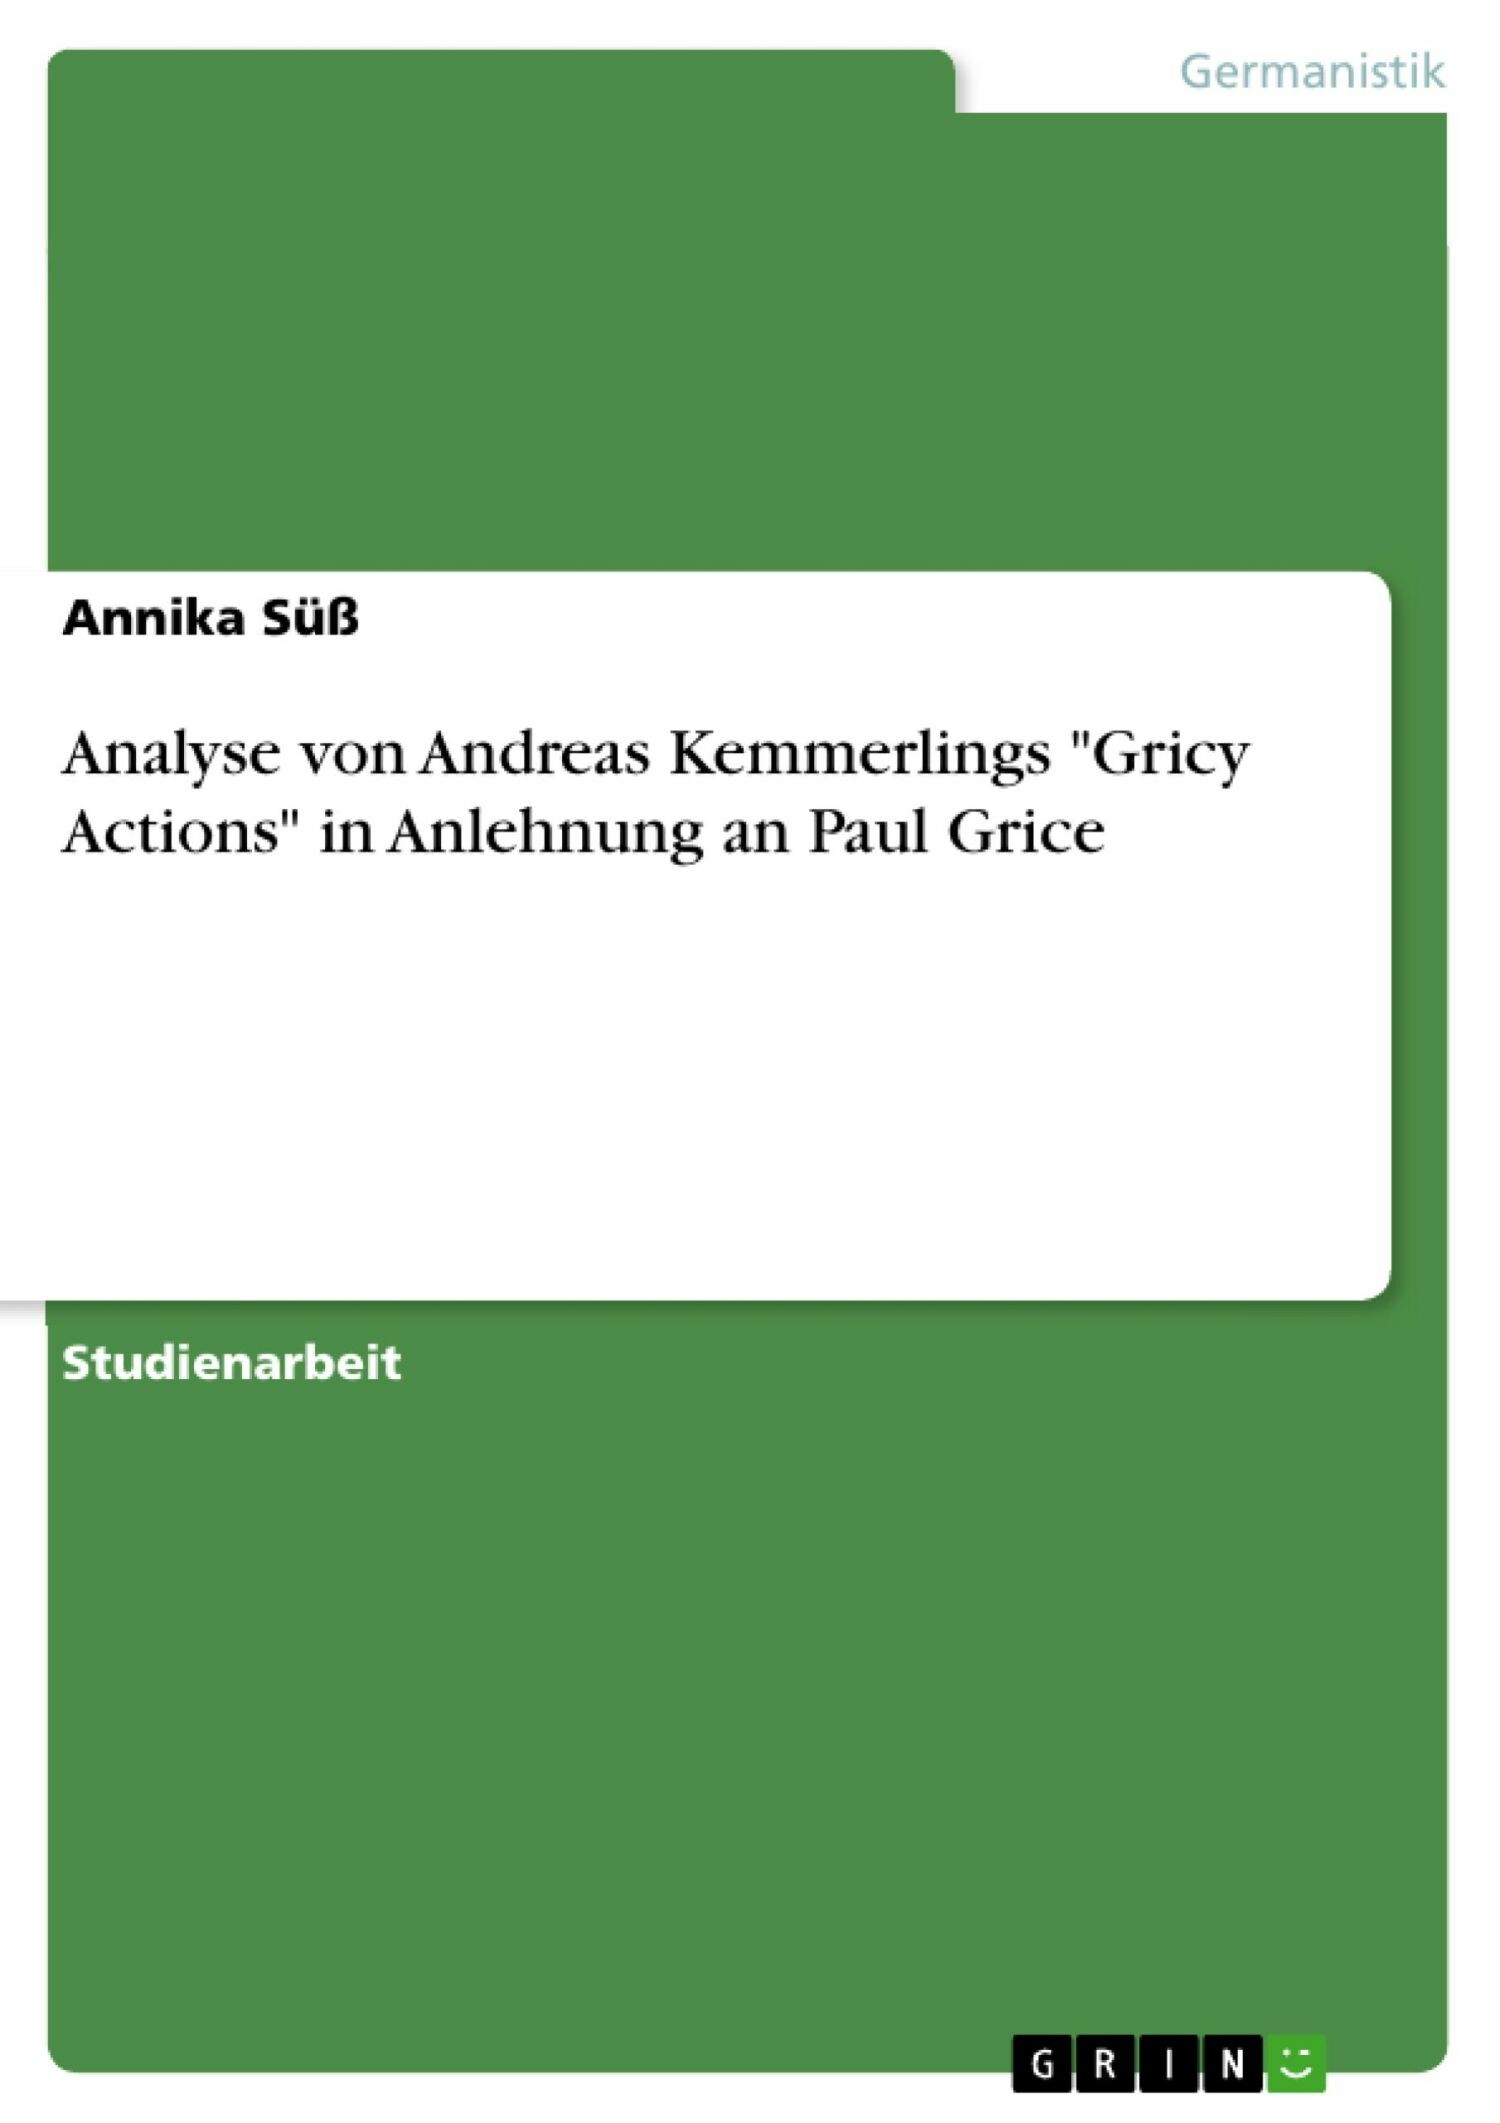 Analyse von Andreas Kemmerlings 'Gricy Actions' in Anlehnung an Paul Grice